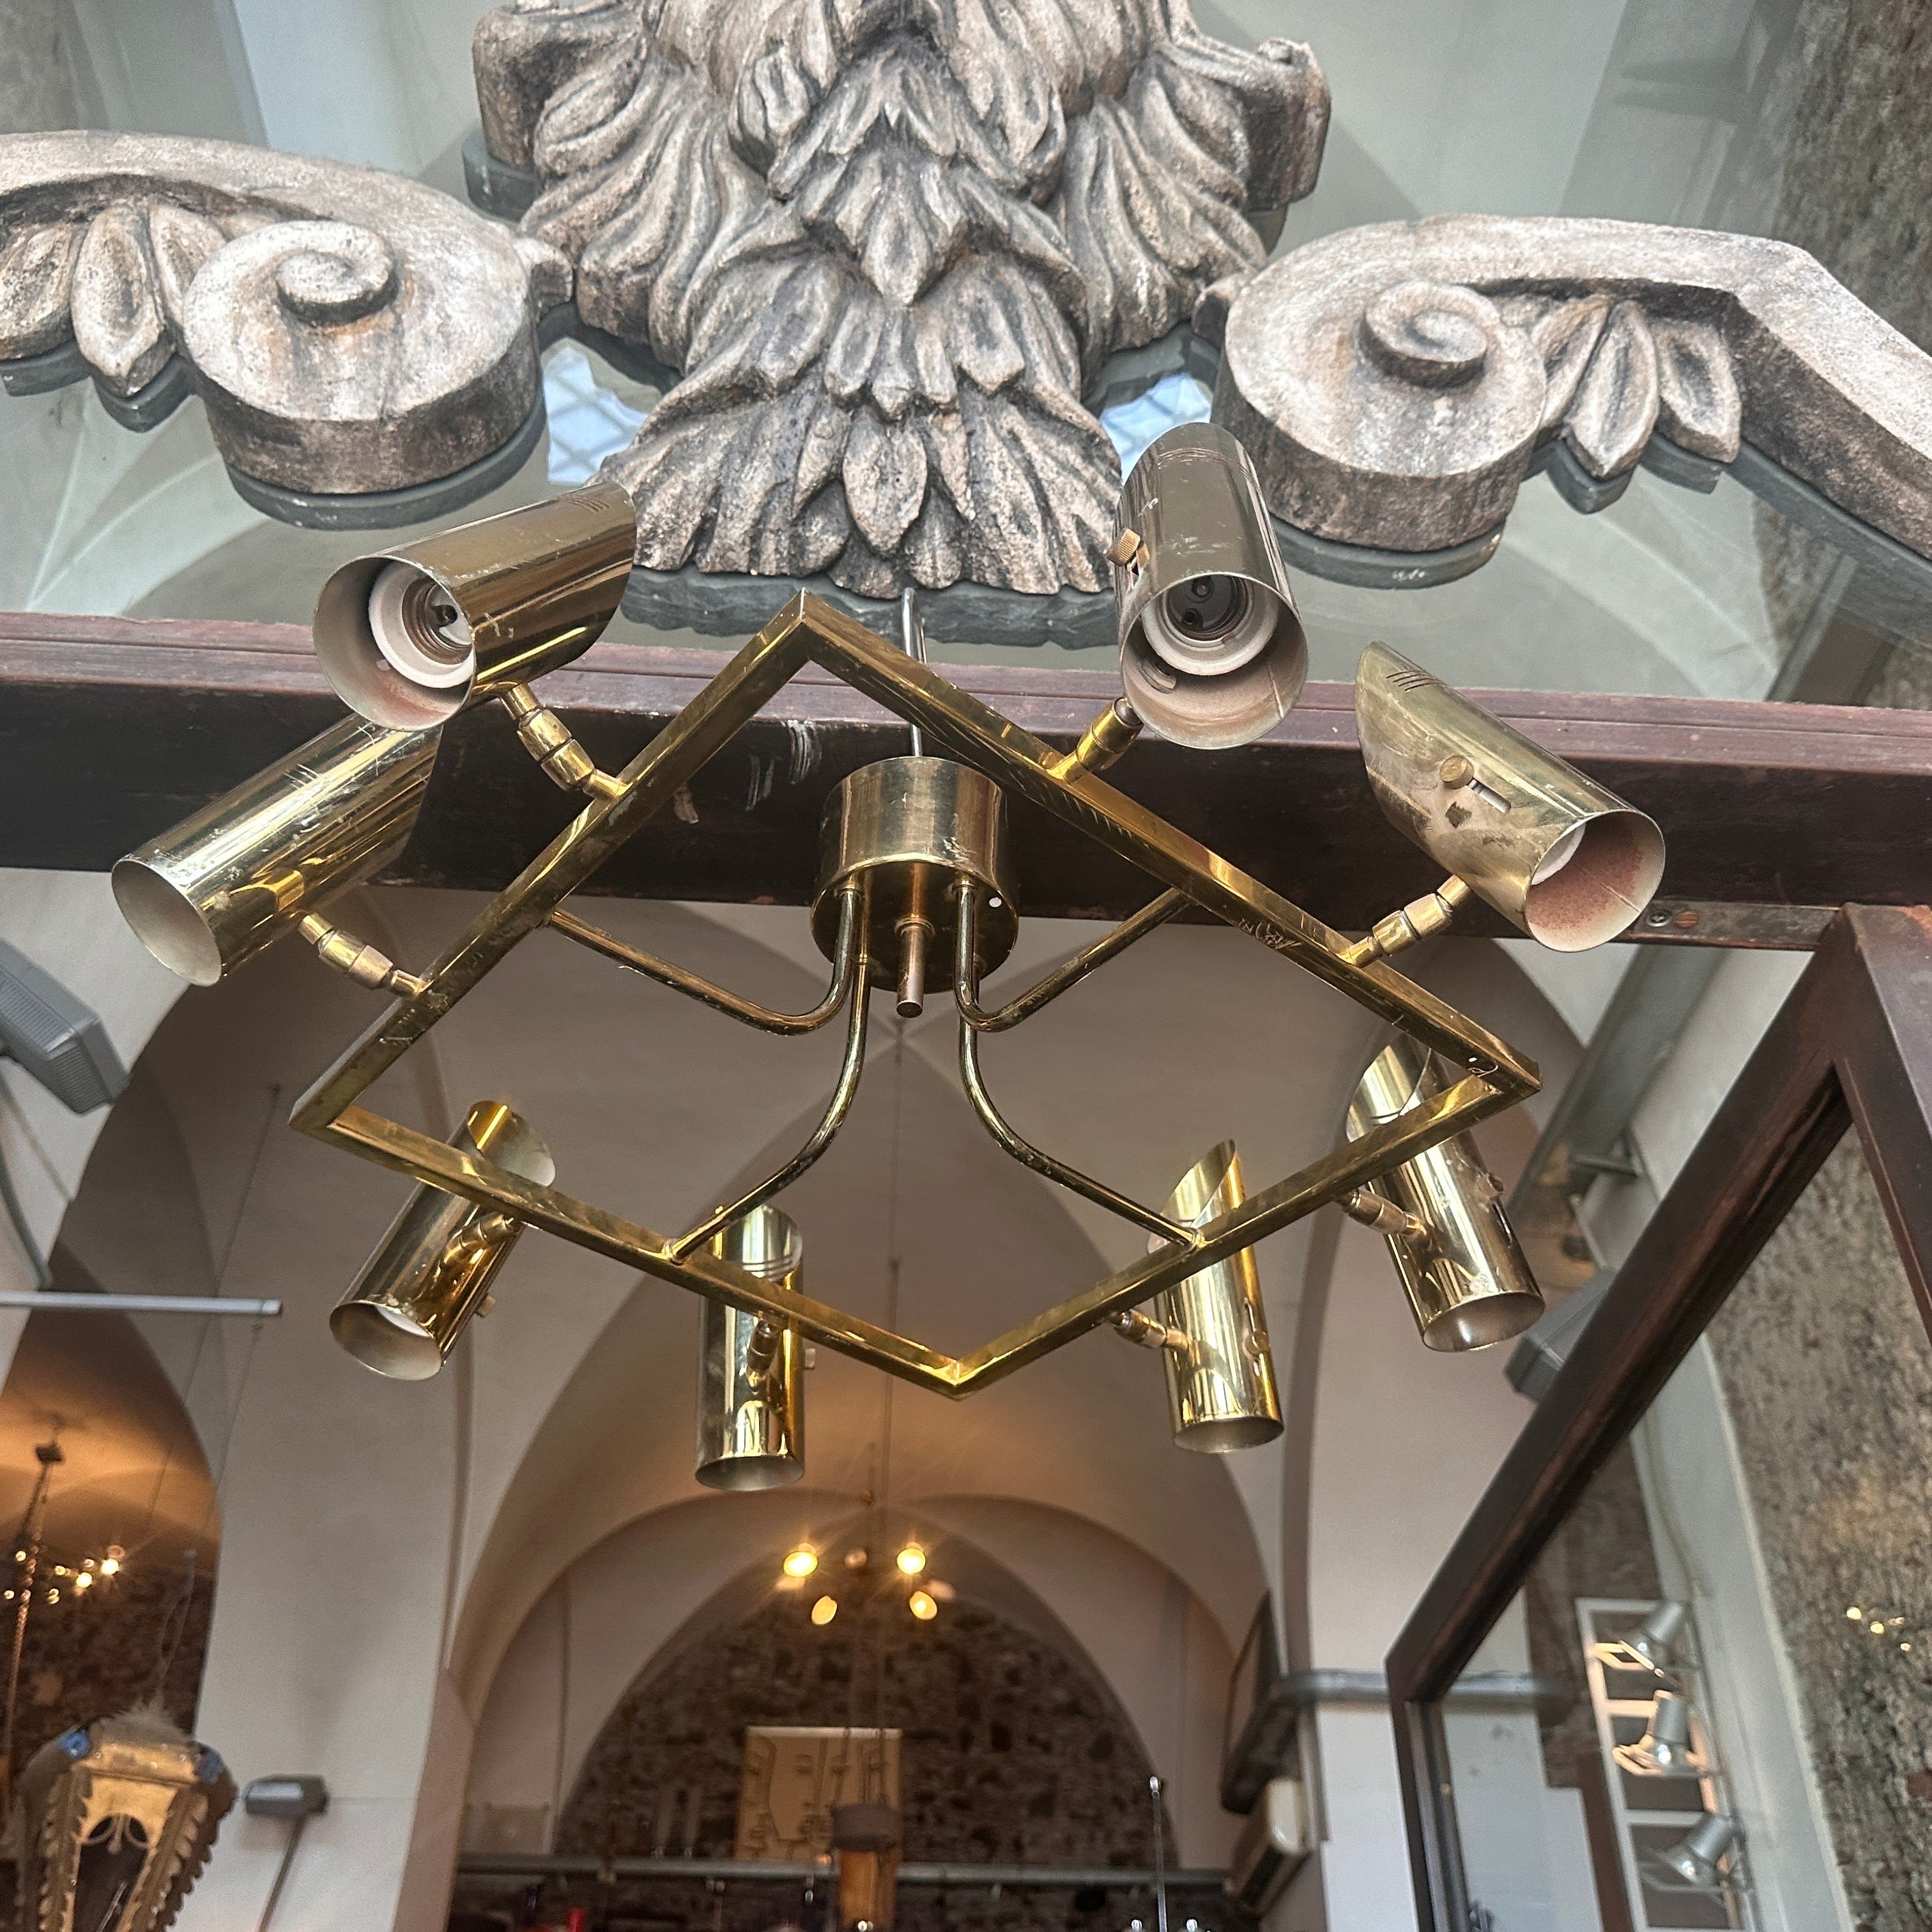 A rare lighting fixture in solid brass designed and manufactured in Italy in the Seventies. It has eight spotlights that can be turned in all directions and make this chandelier extremely versatile.
This stunning Italian lighting fixture pays homage